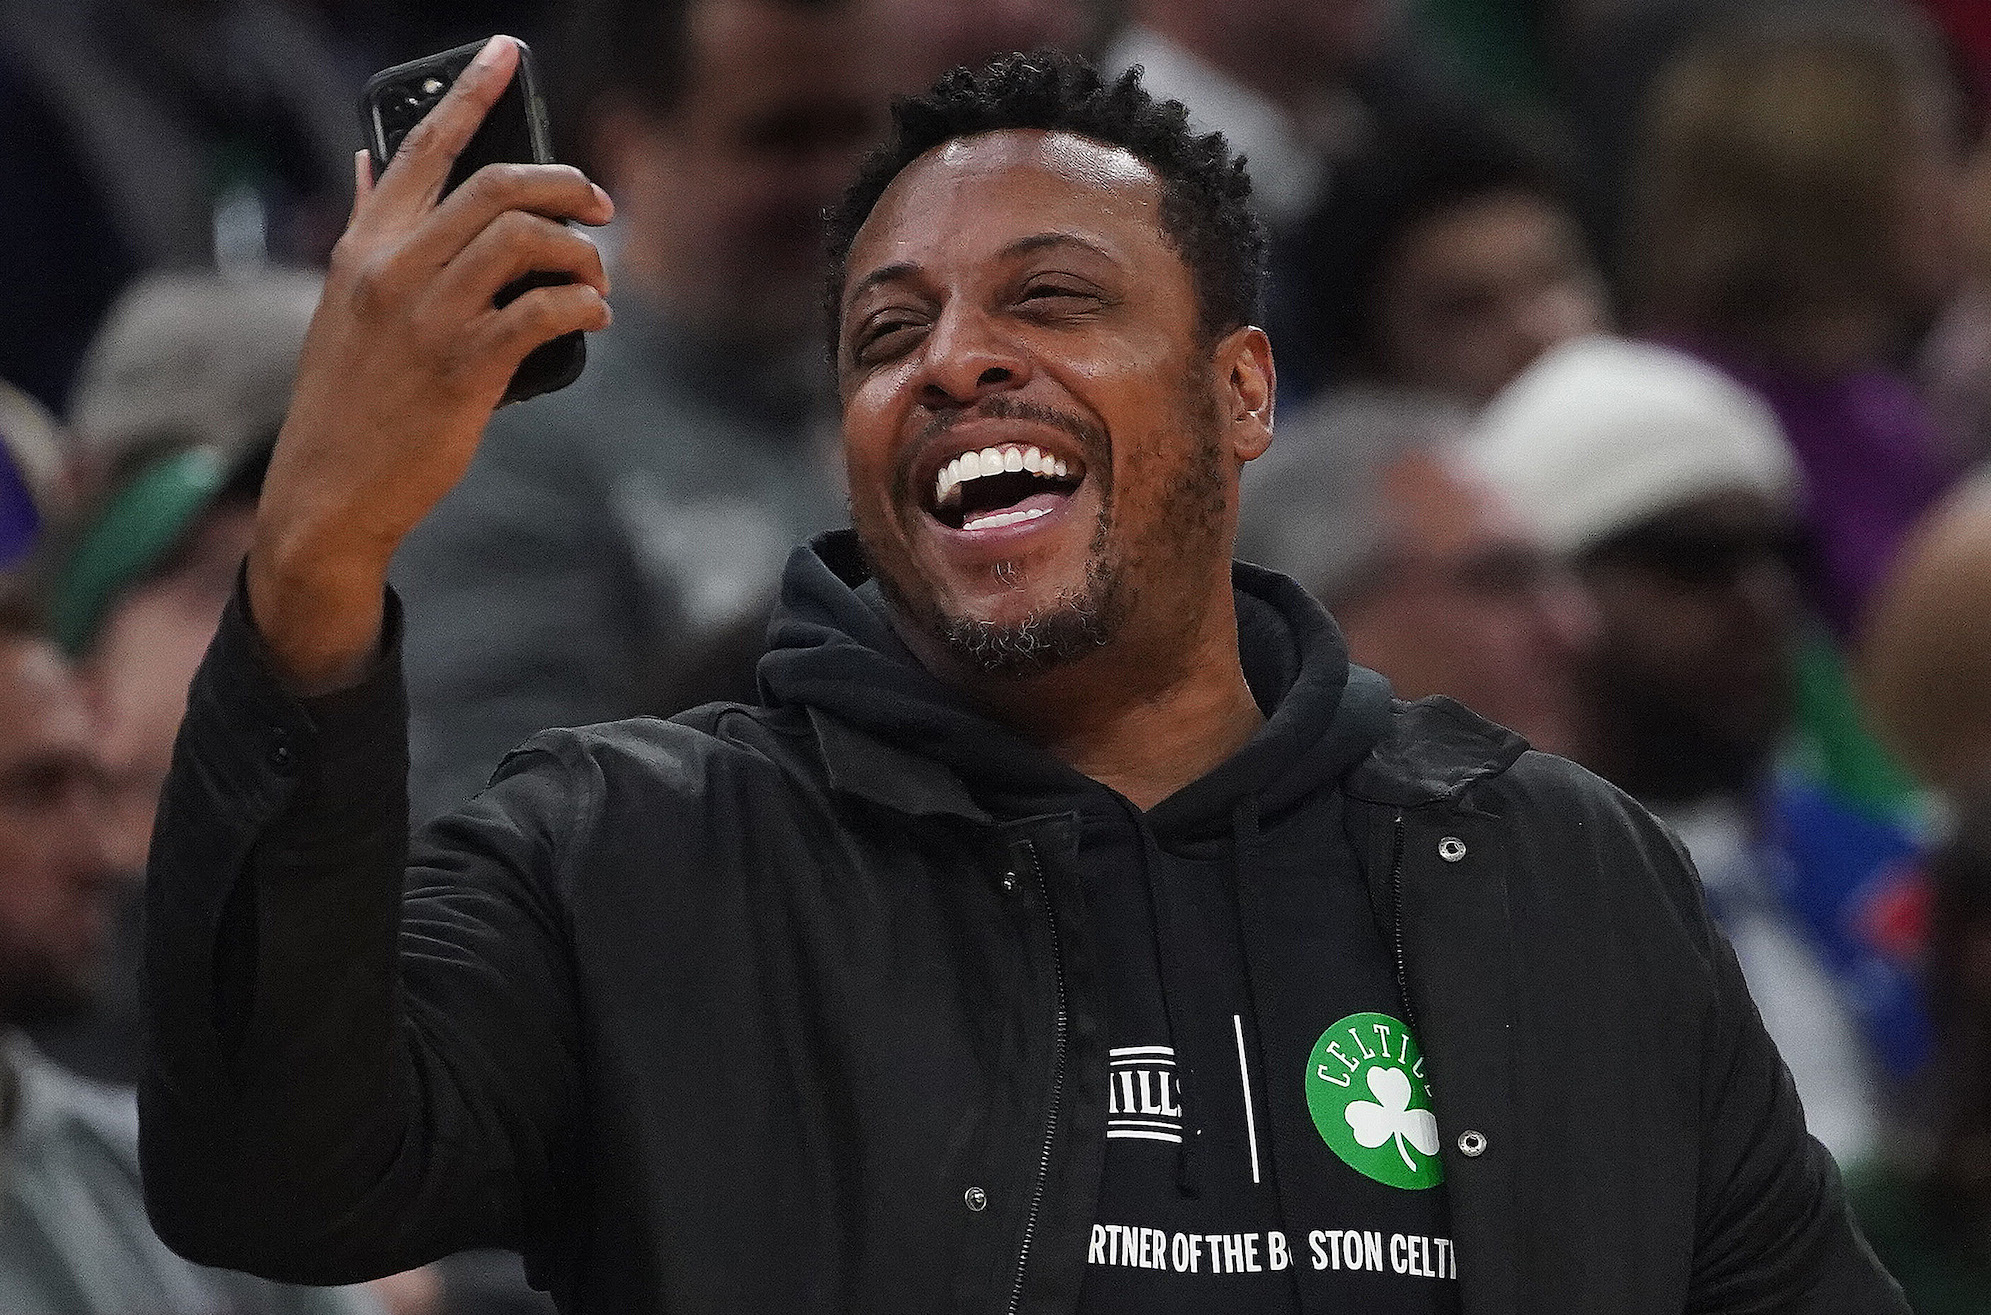 Paul Pierce looks at his phone during a Celtics game